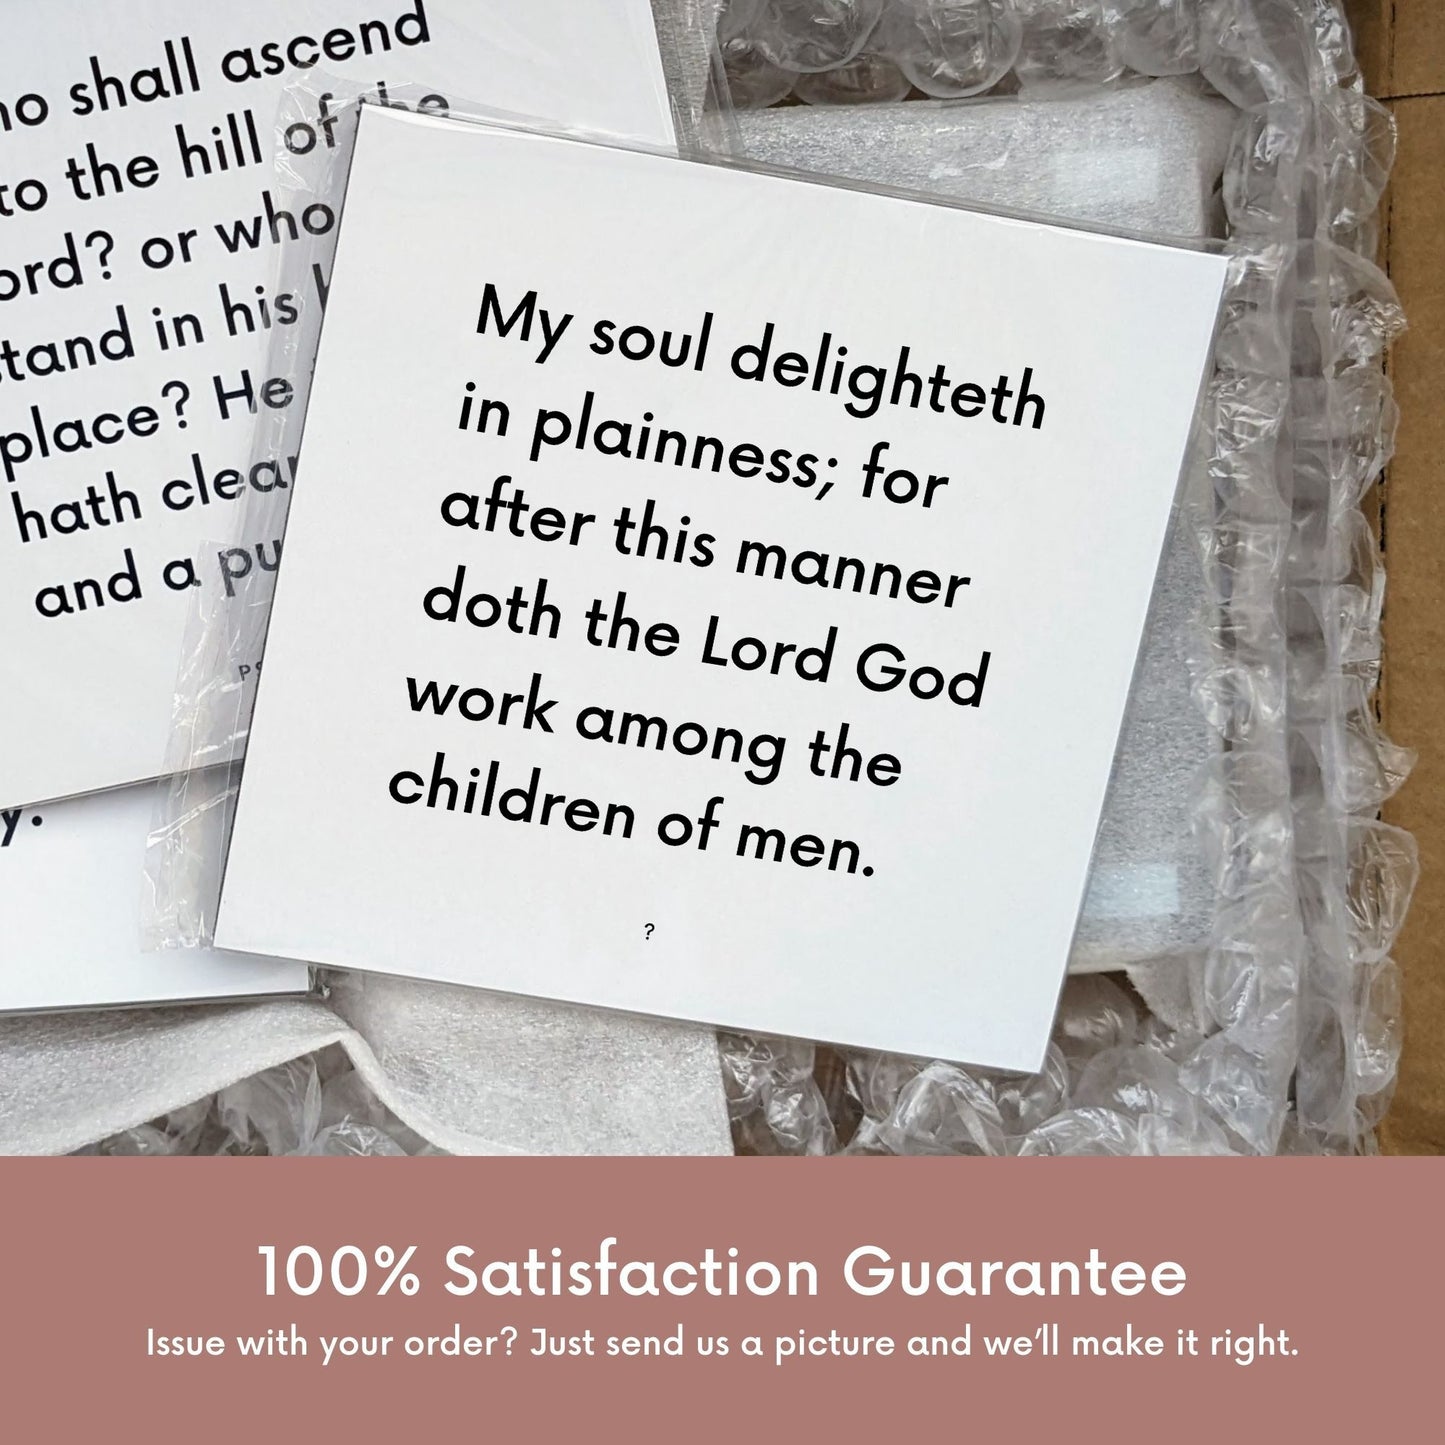 Shipping materials for scripture tile of 2 Nephi 31:3 - "My soul delighteth in plainness"